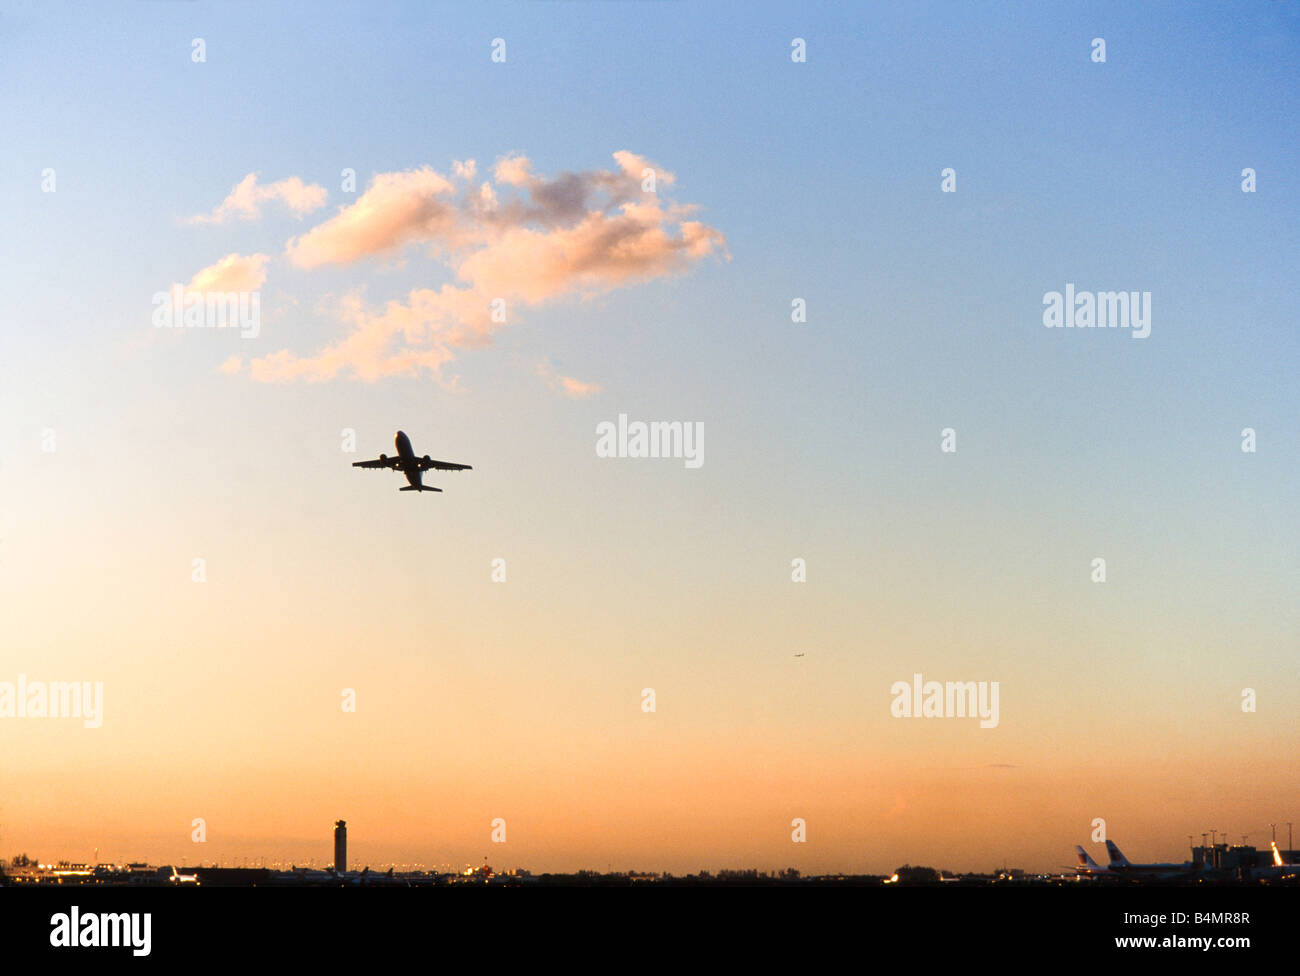 Commercial Airliner taking off, dramatic cloud filled skies. Stock Photo